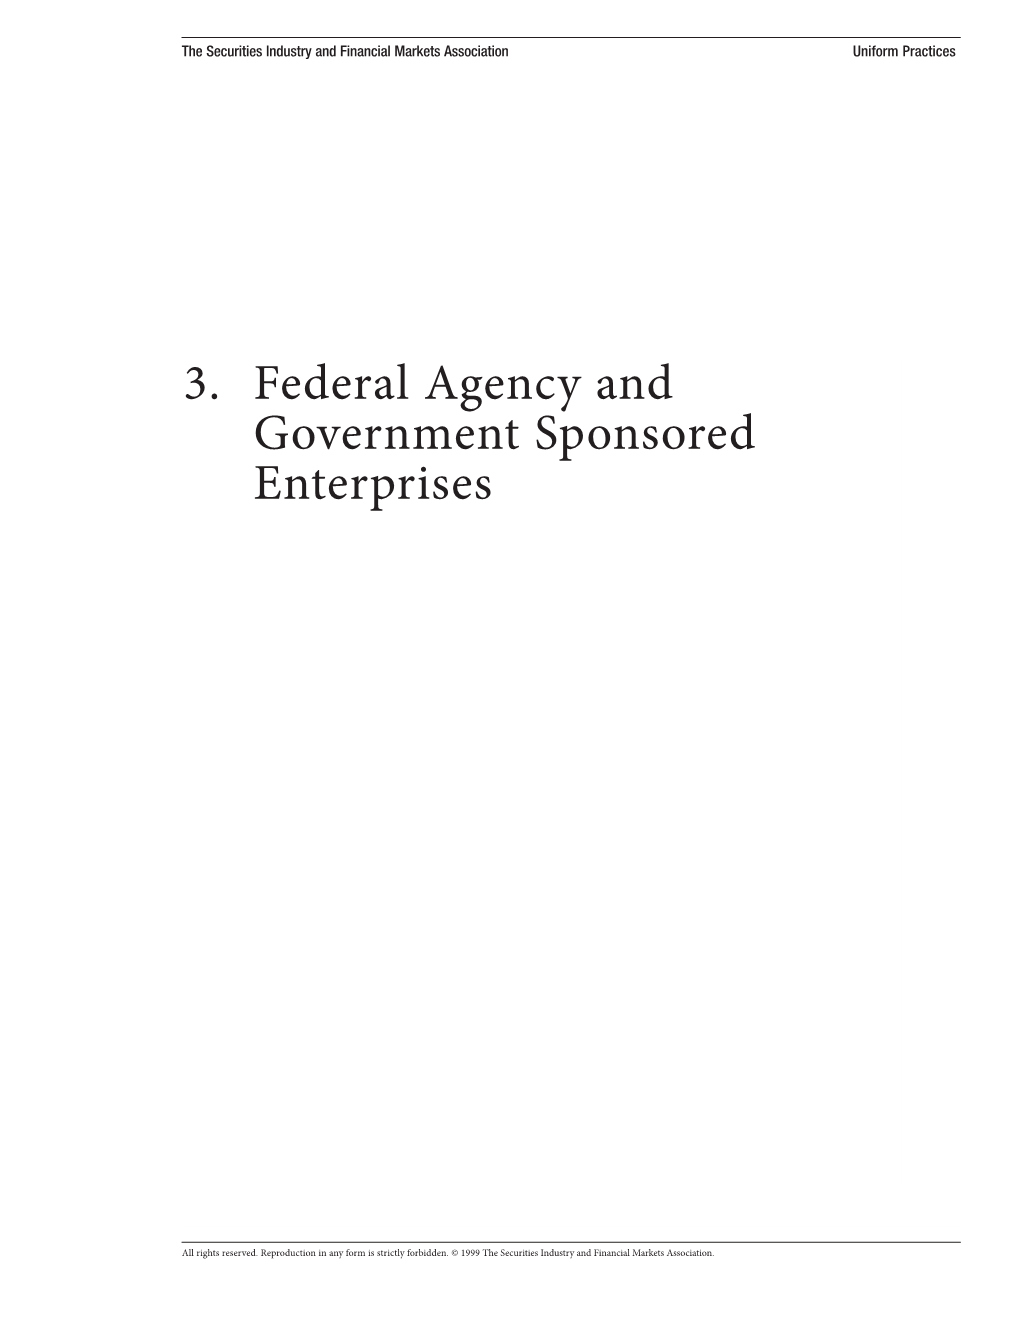 3. Federal Agency and Government Sponsored Enterprises